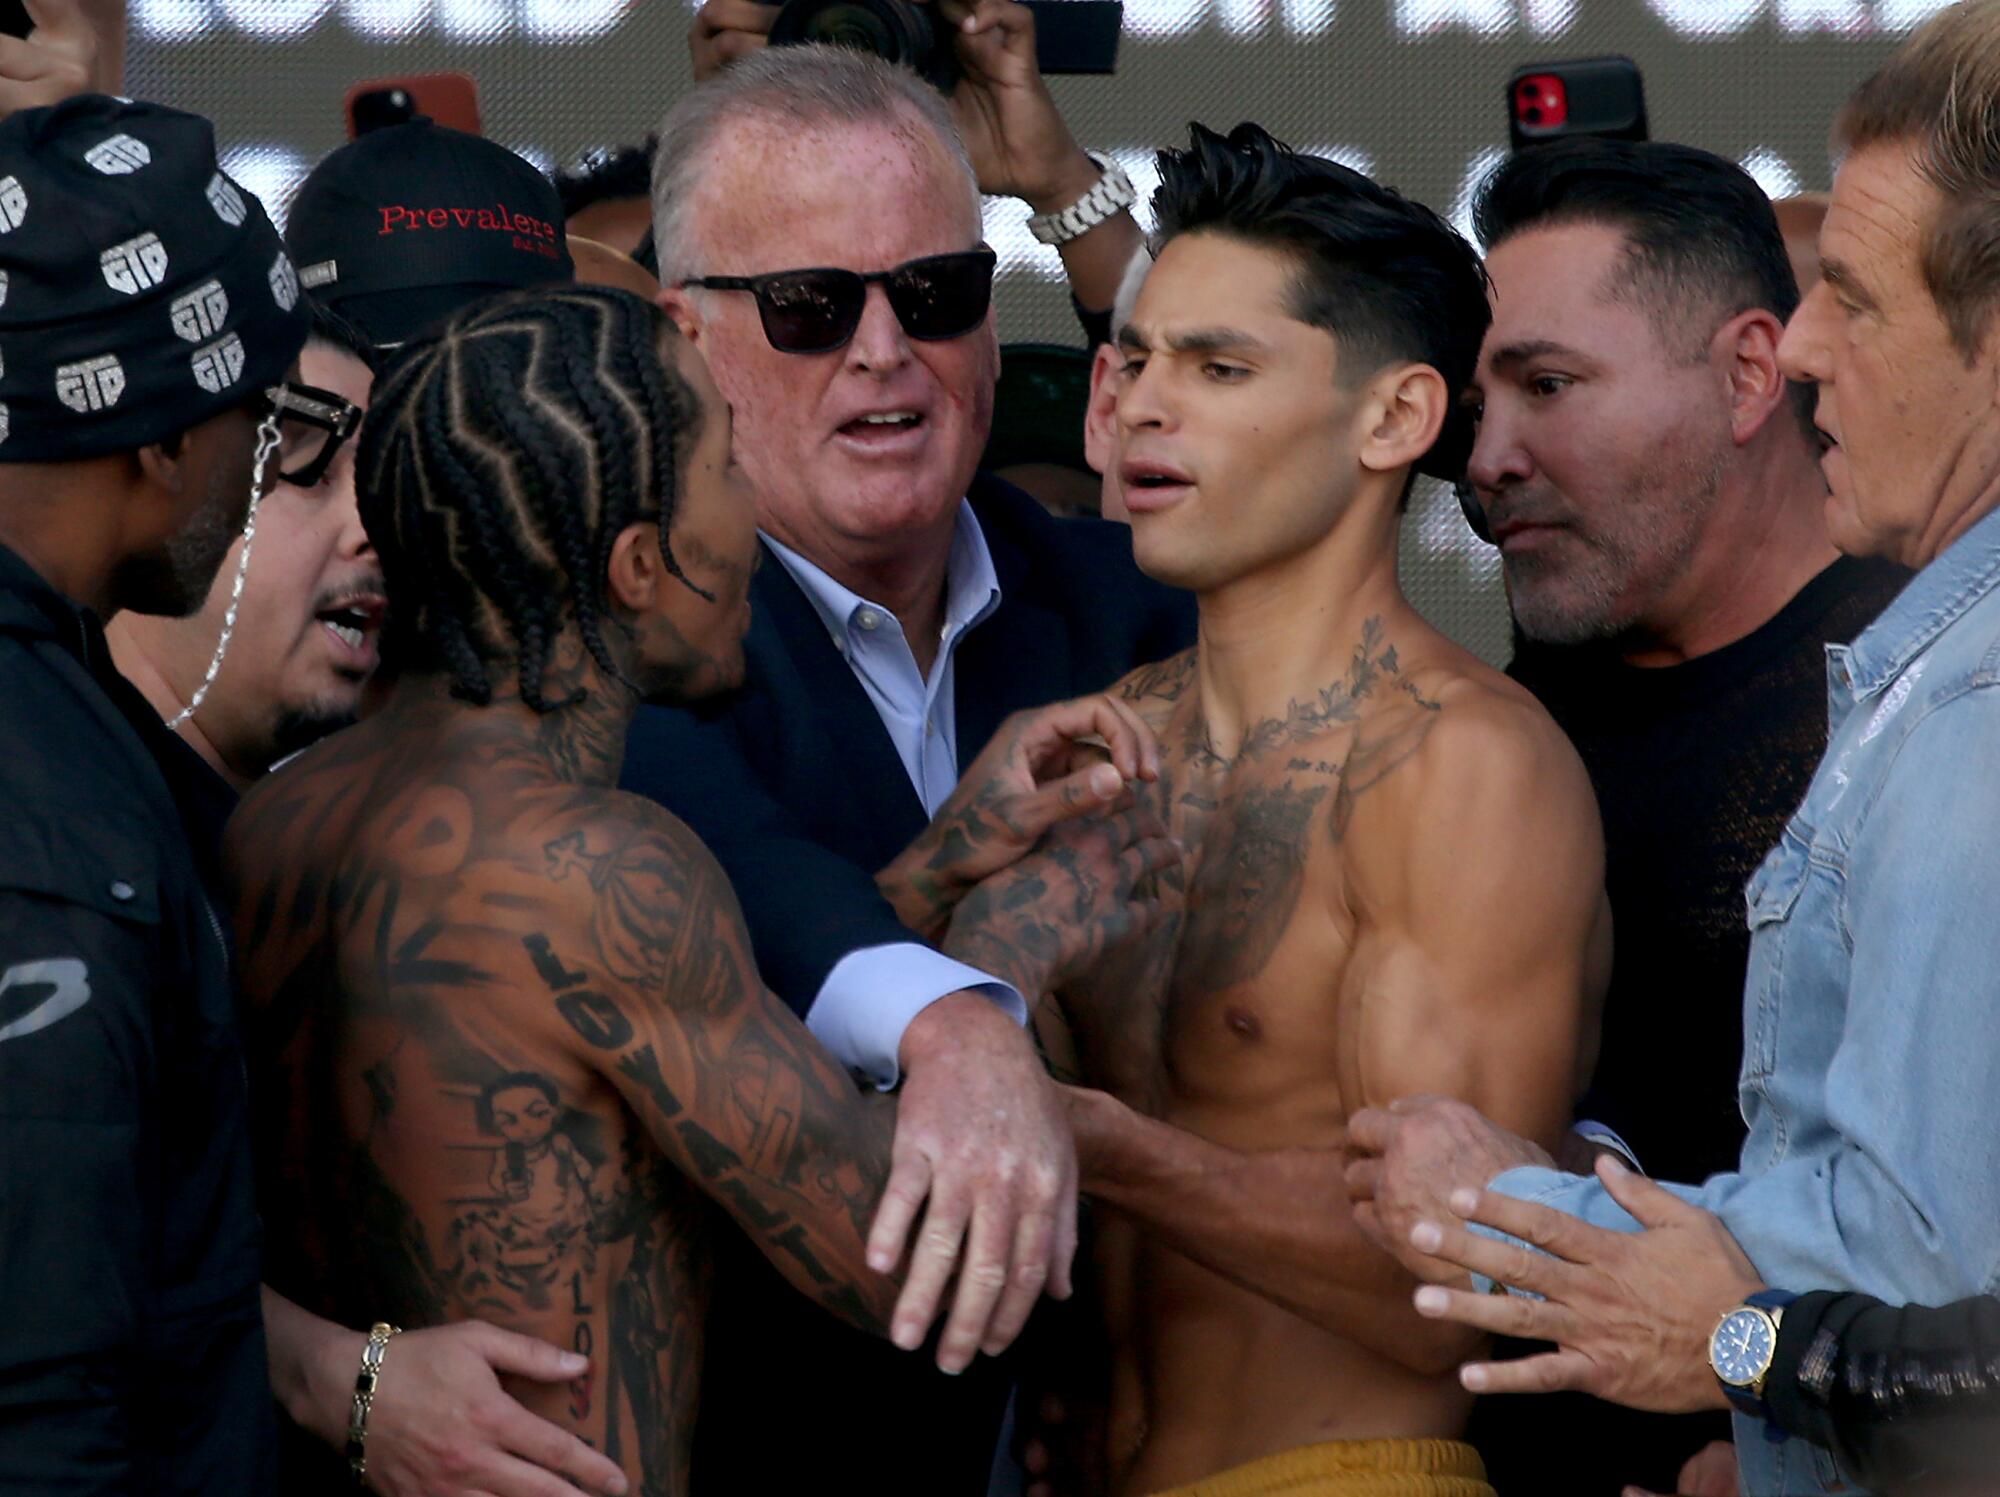 Things get a little physical between boxers Gervonta Davis, left, and Ryan Garcia as they face off during thre weigh-in.